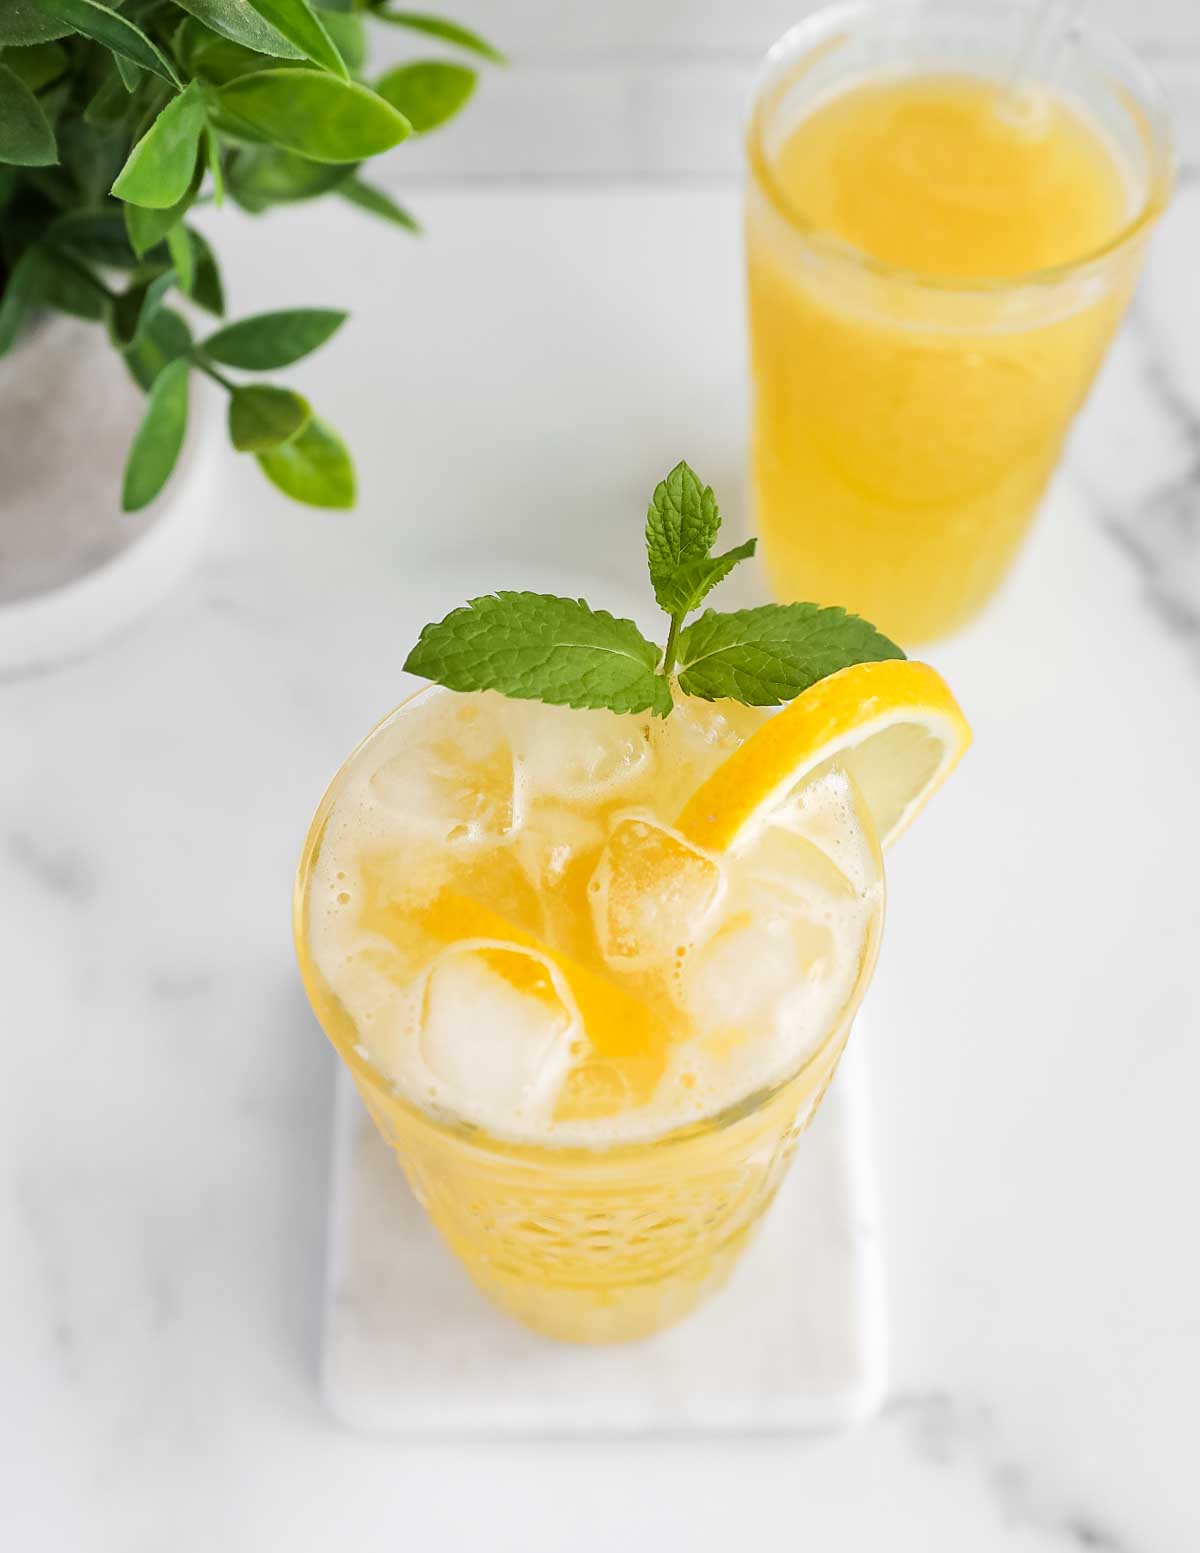 A clear glass filled with yellow lemonade, ice, sprig of green mint, and a lemon slice.